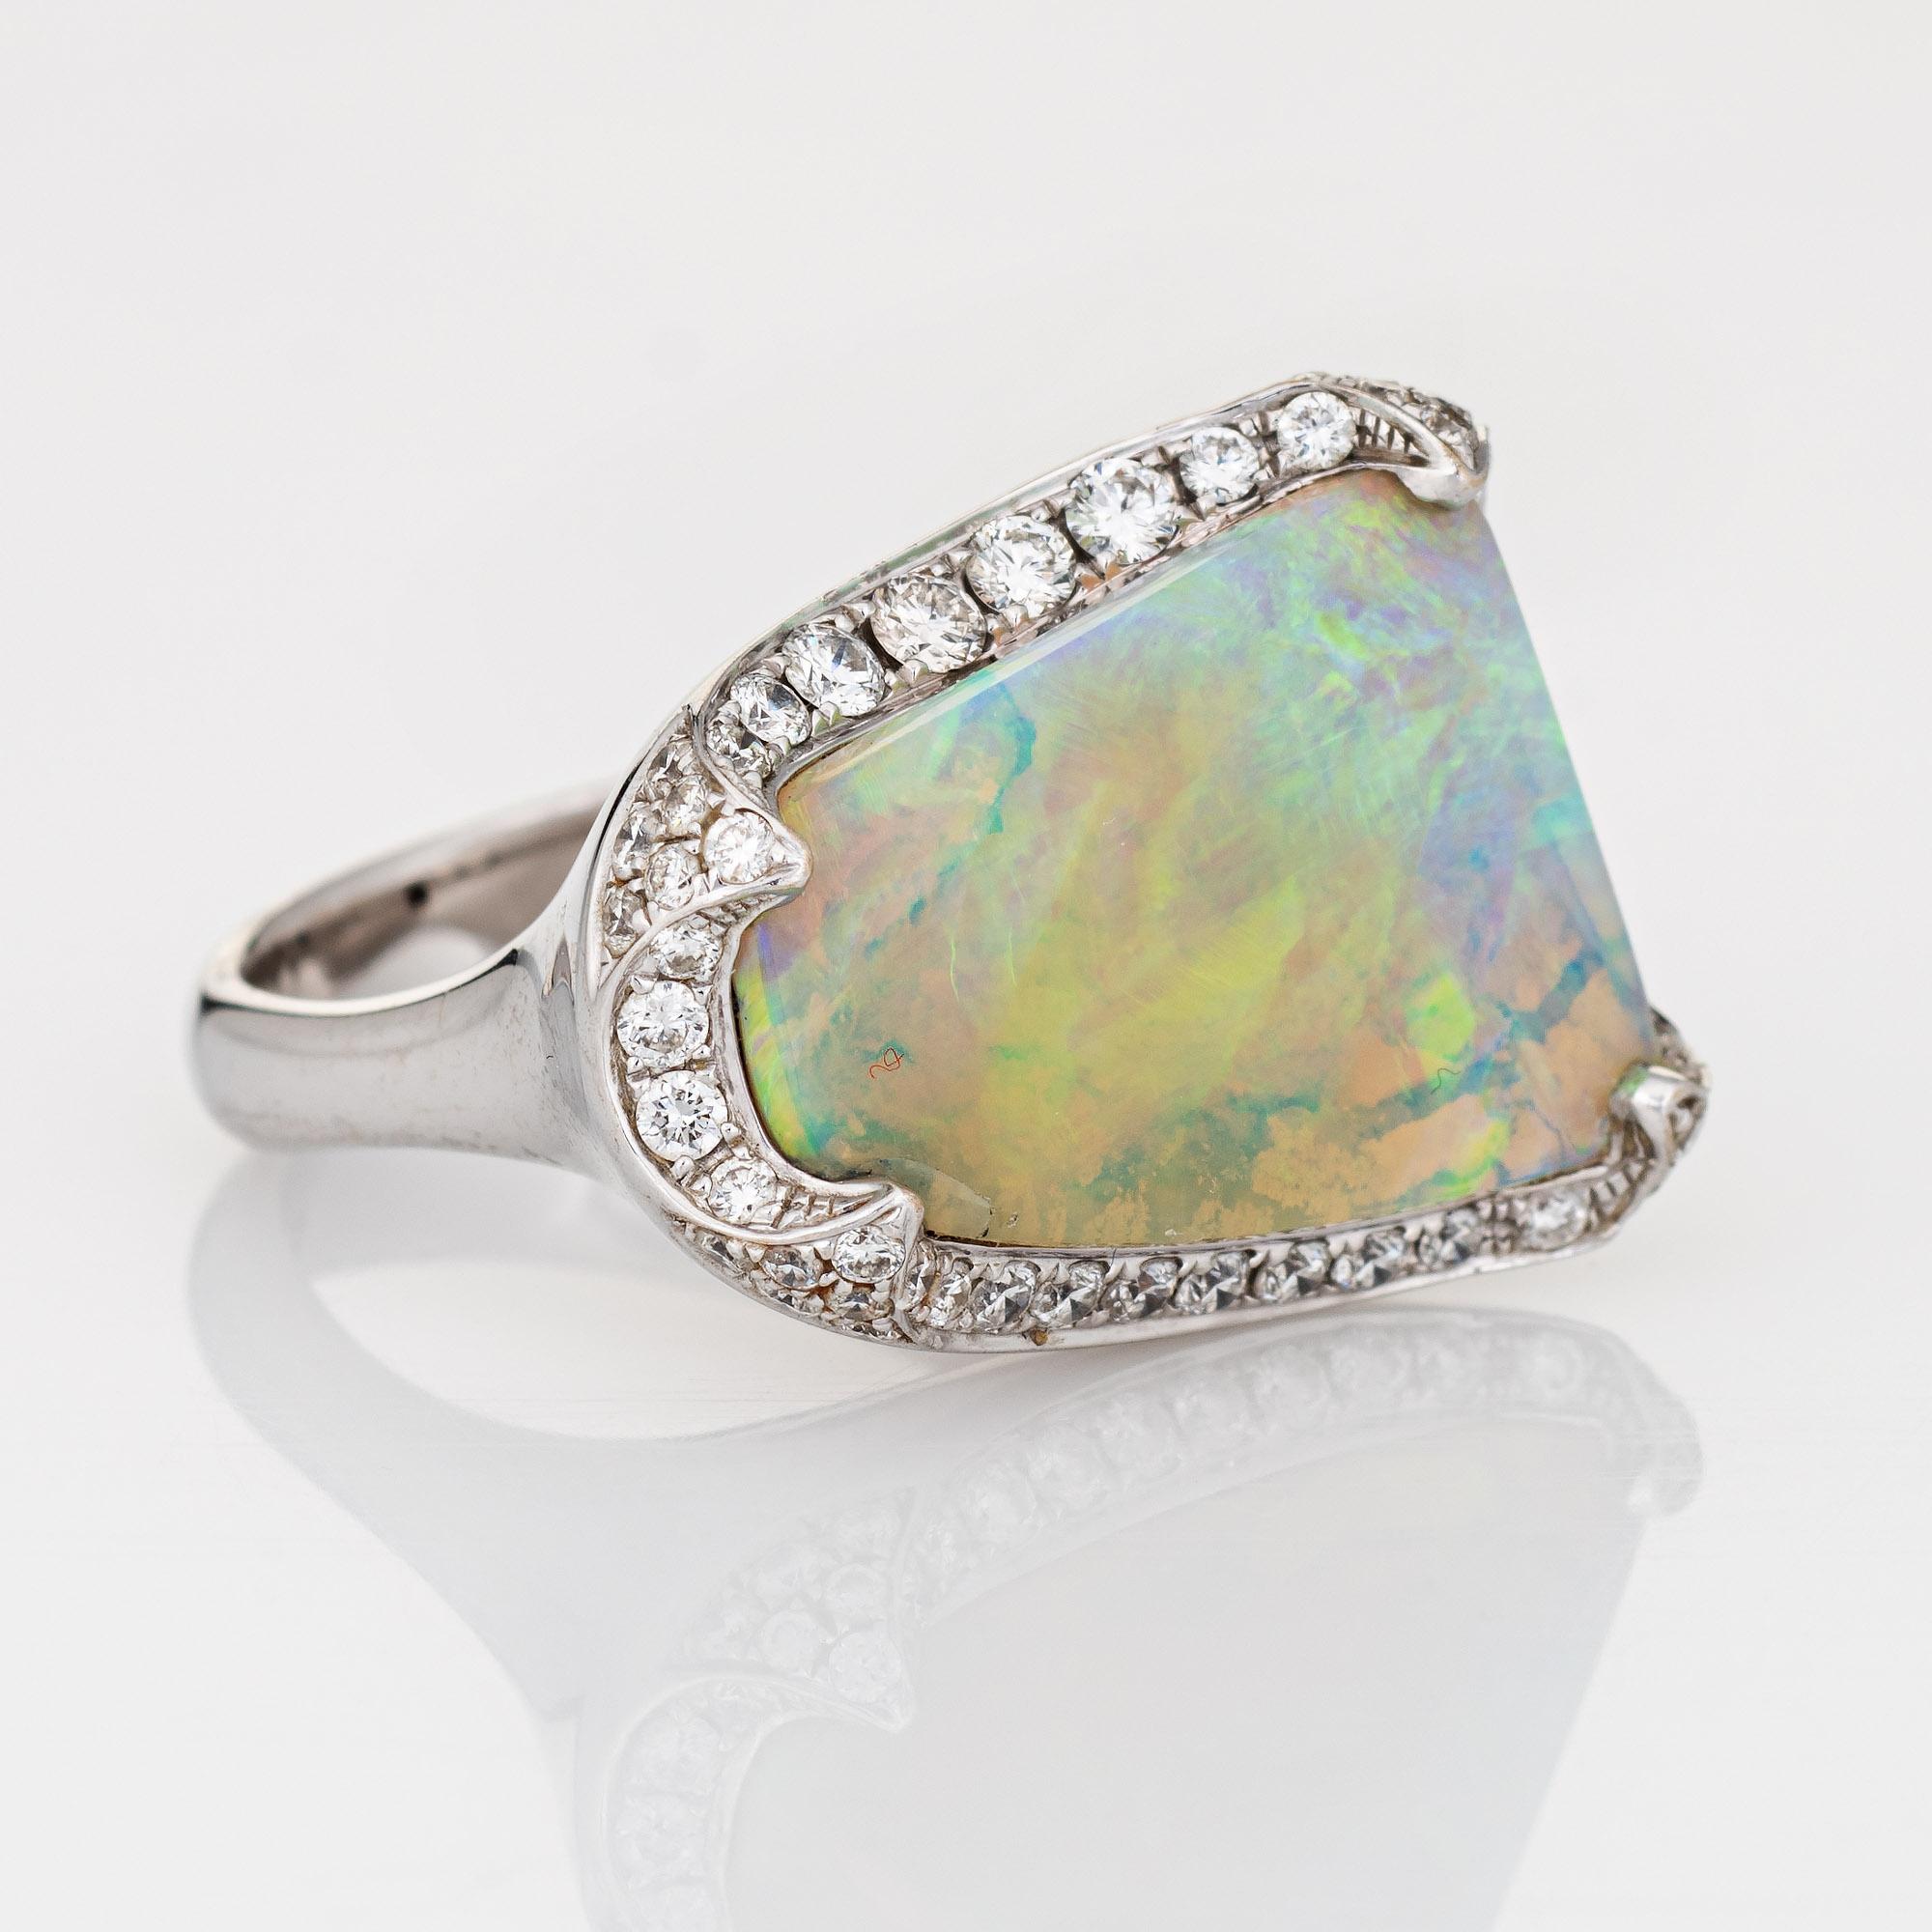 Contemporary 10.64ct Natural Opal Diamond Ring Estate 18k White Gold Sz 7 Fine Jewelry  For Sale